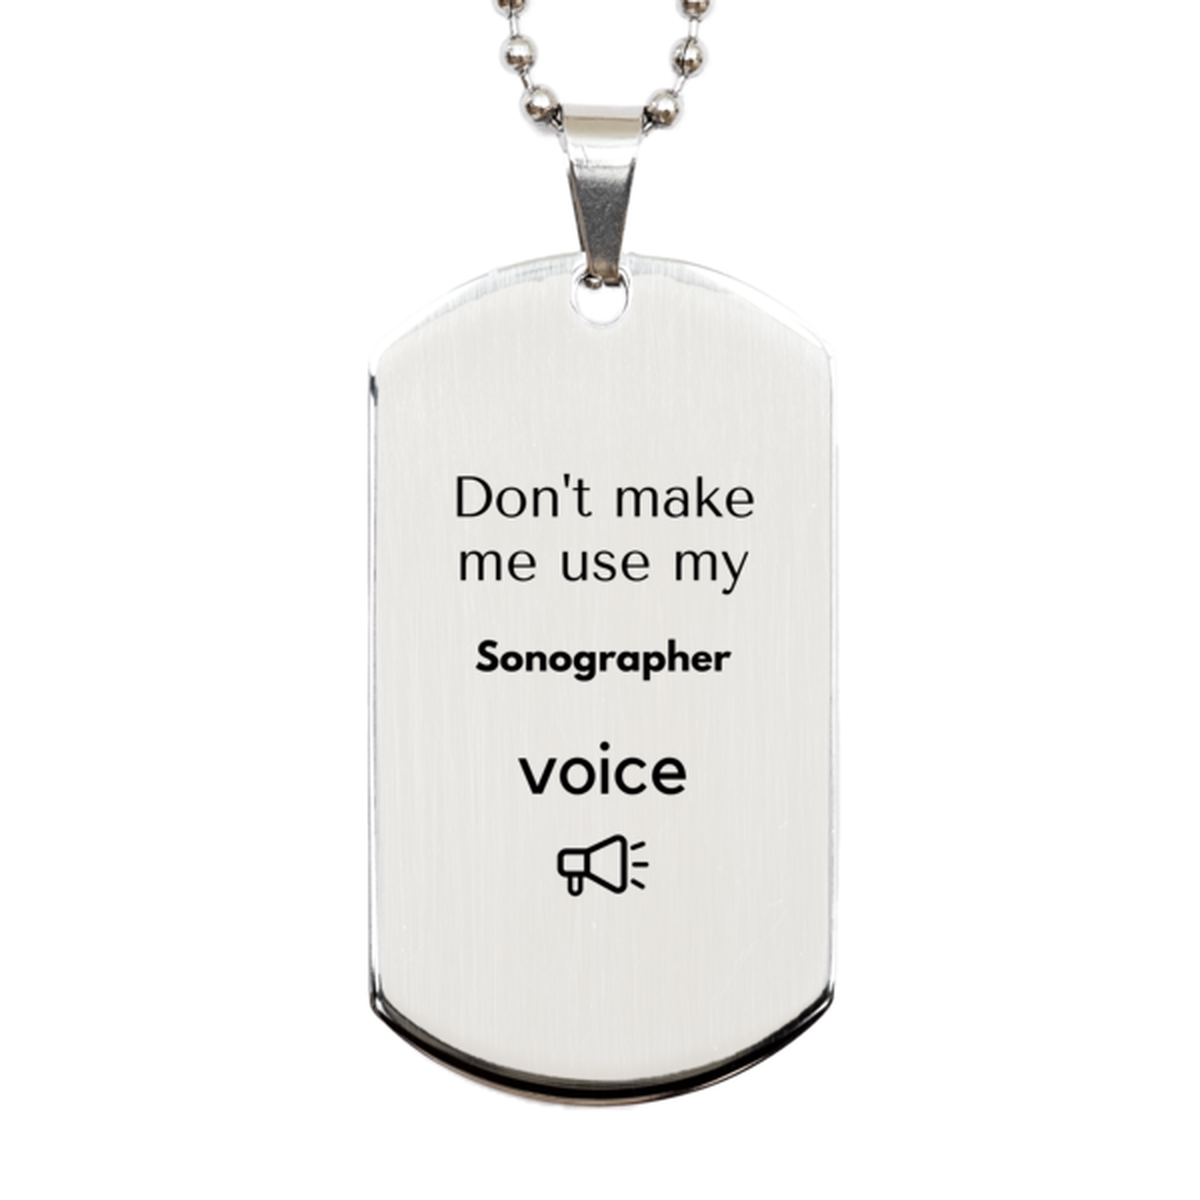 Don't make me use my Sonographer voice, Sarcasm Sonographer Gifts, Christmas Sonographer Silver Dog Tag Birthday Unique Gifts For Sonographer Coworkers, Men, Women, Colleague, Friends